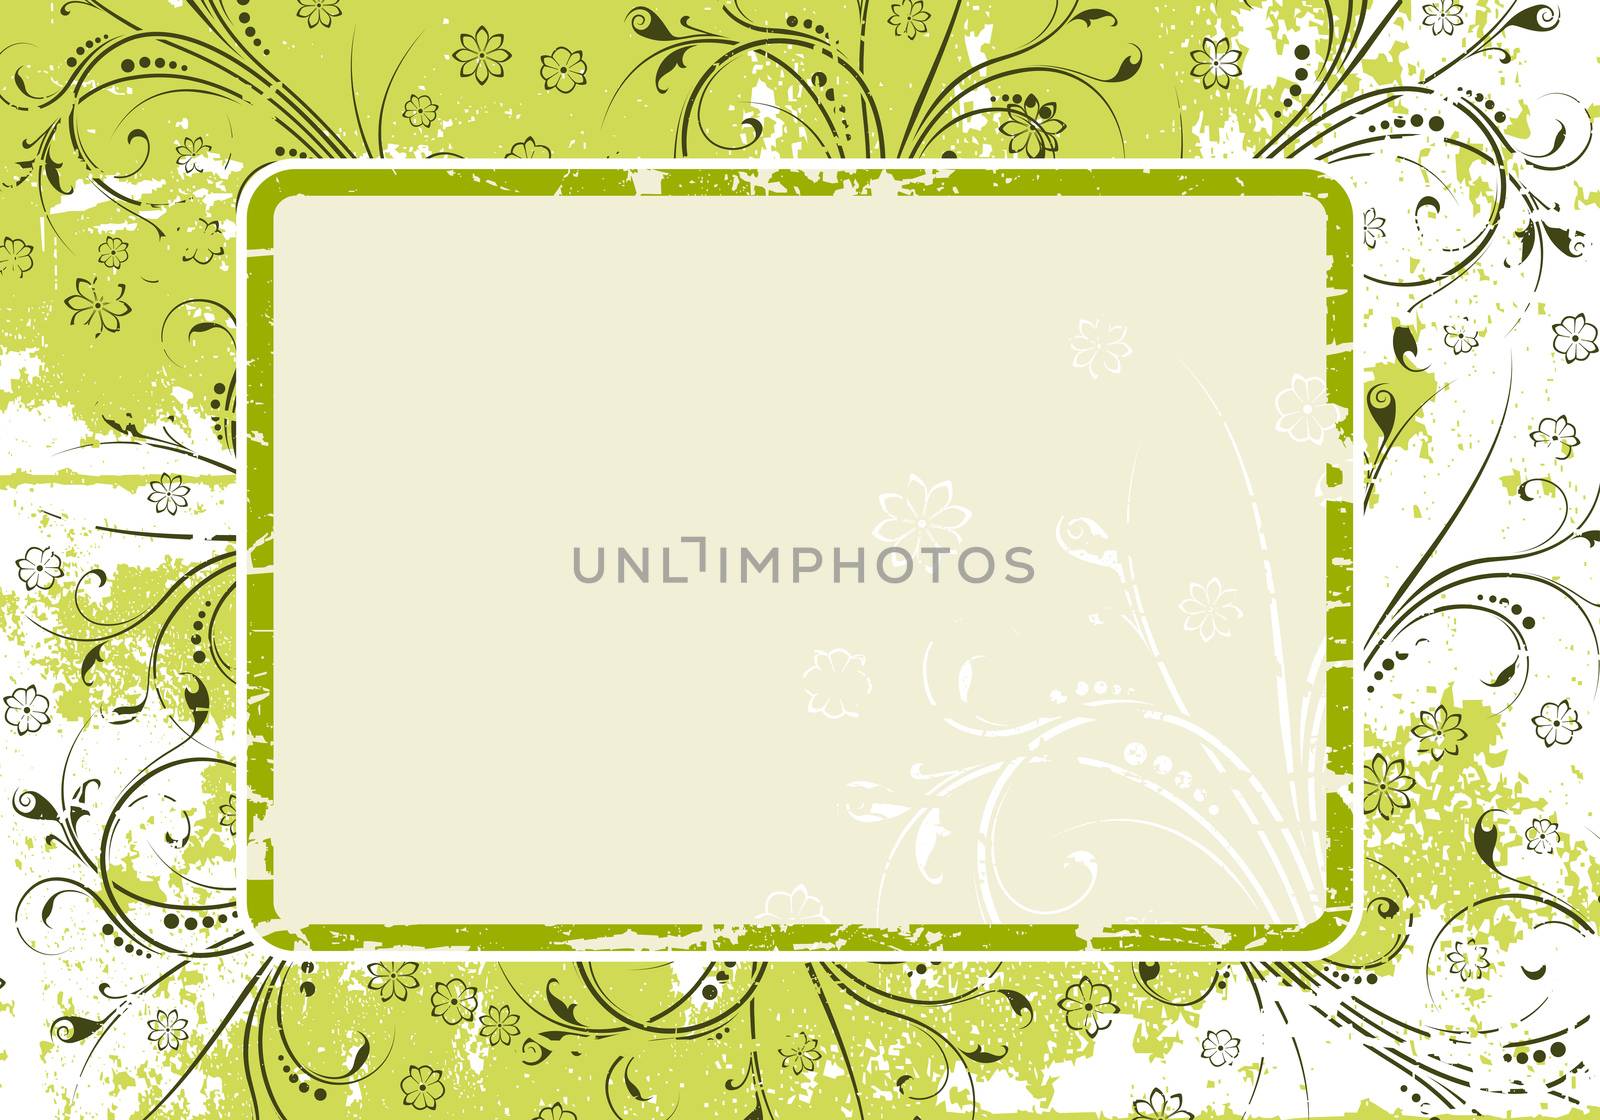 Abstract grunge painted background with floral scrolls vector illustration